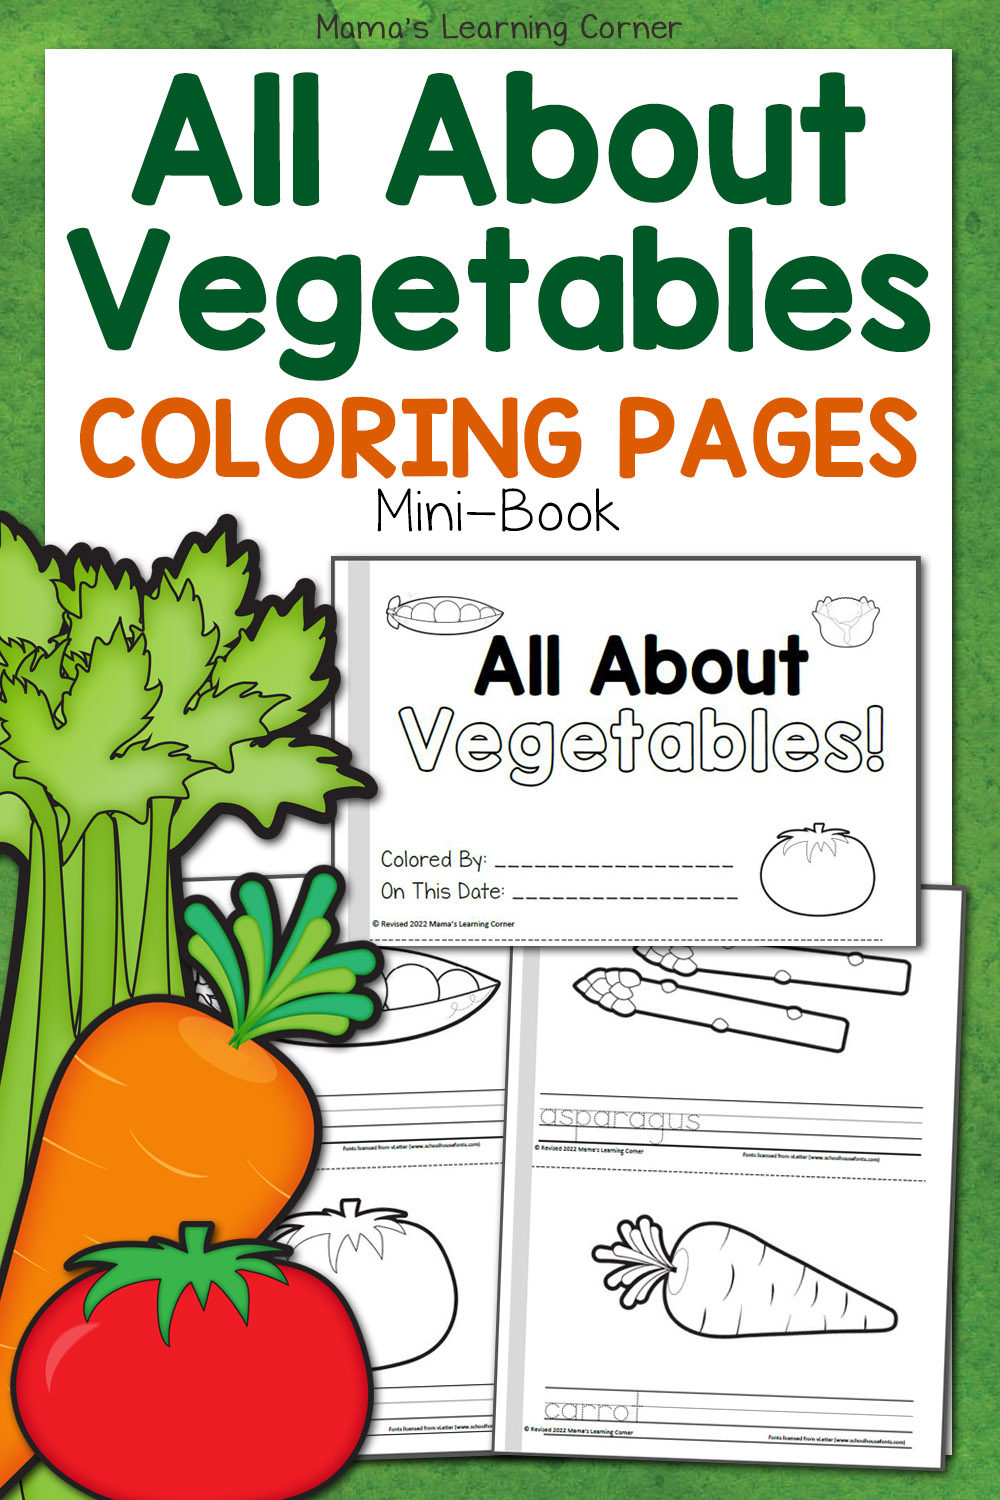 I. Introduction to Coloring Books for Learning About Different Types of Vegetables